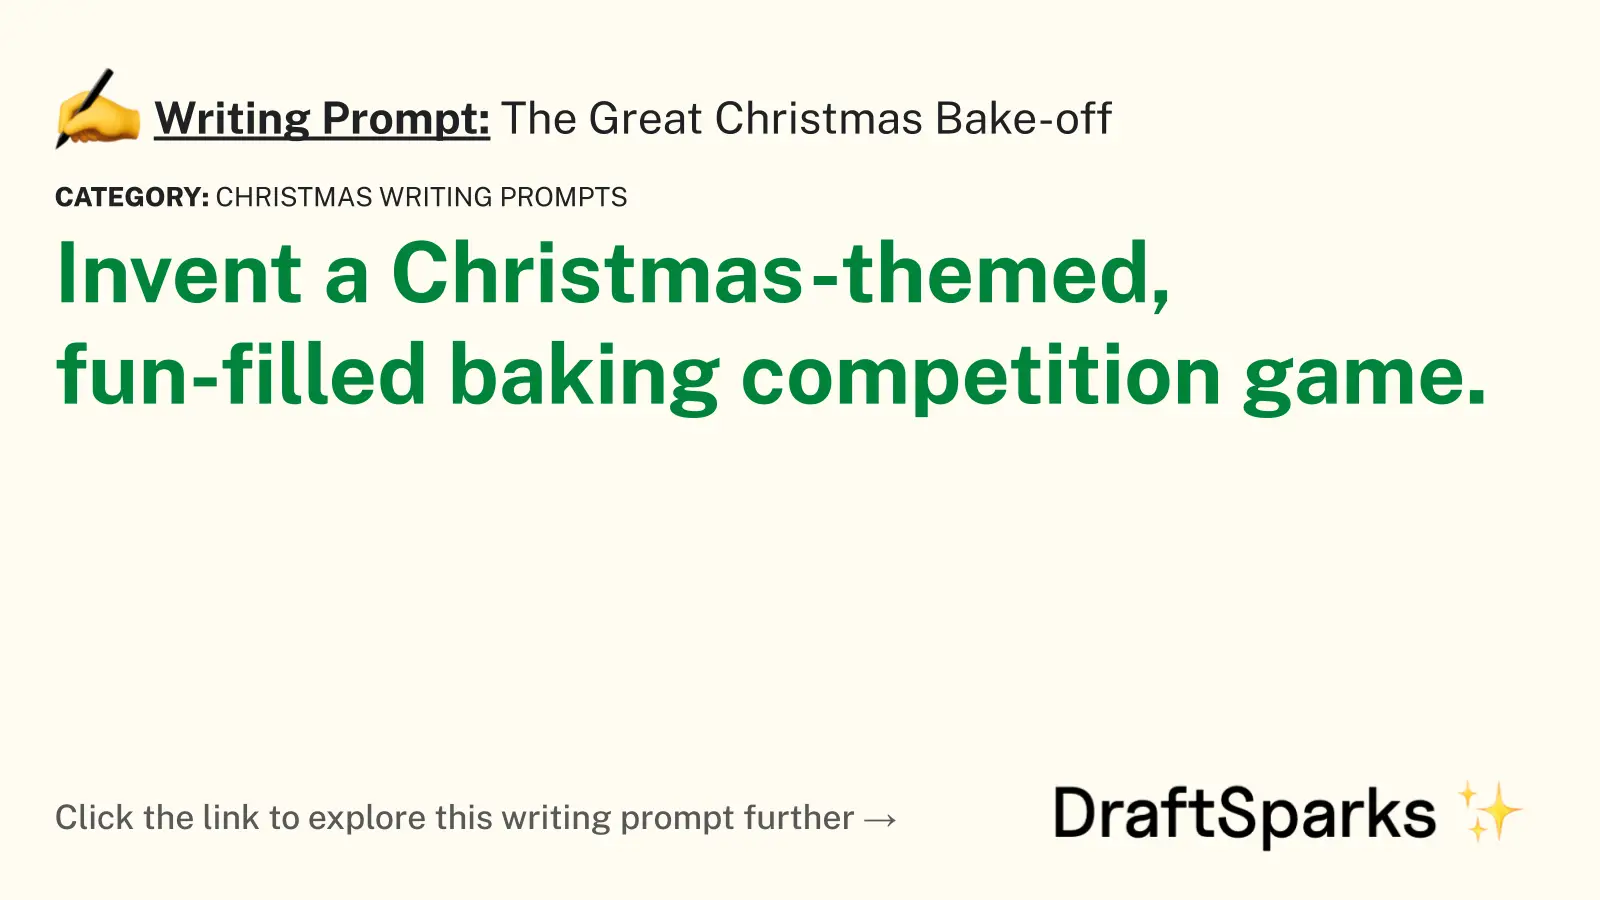 The Great Christmas Bake-off